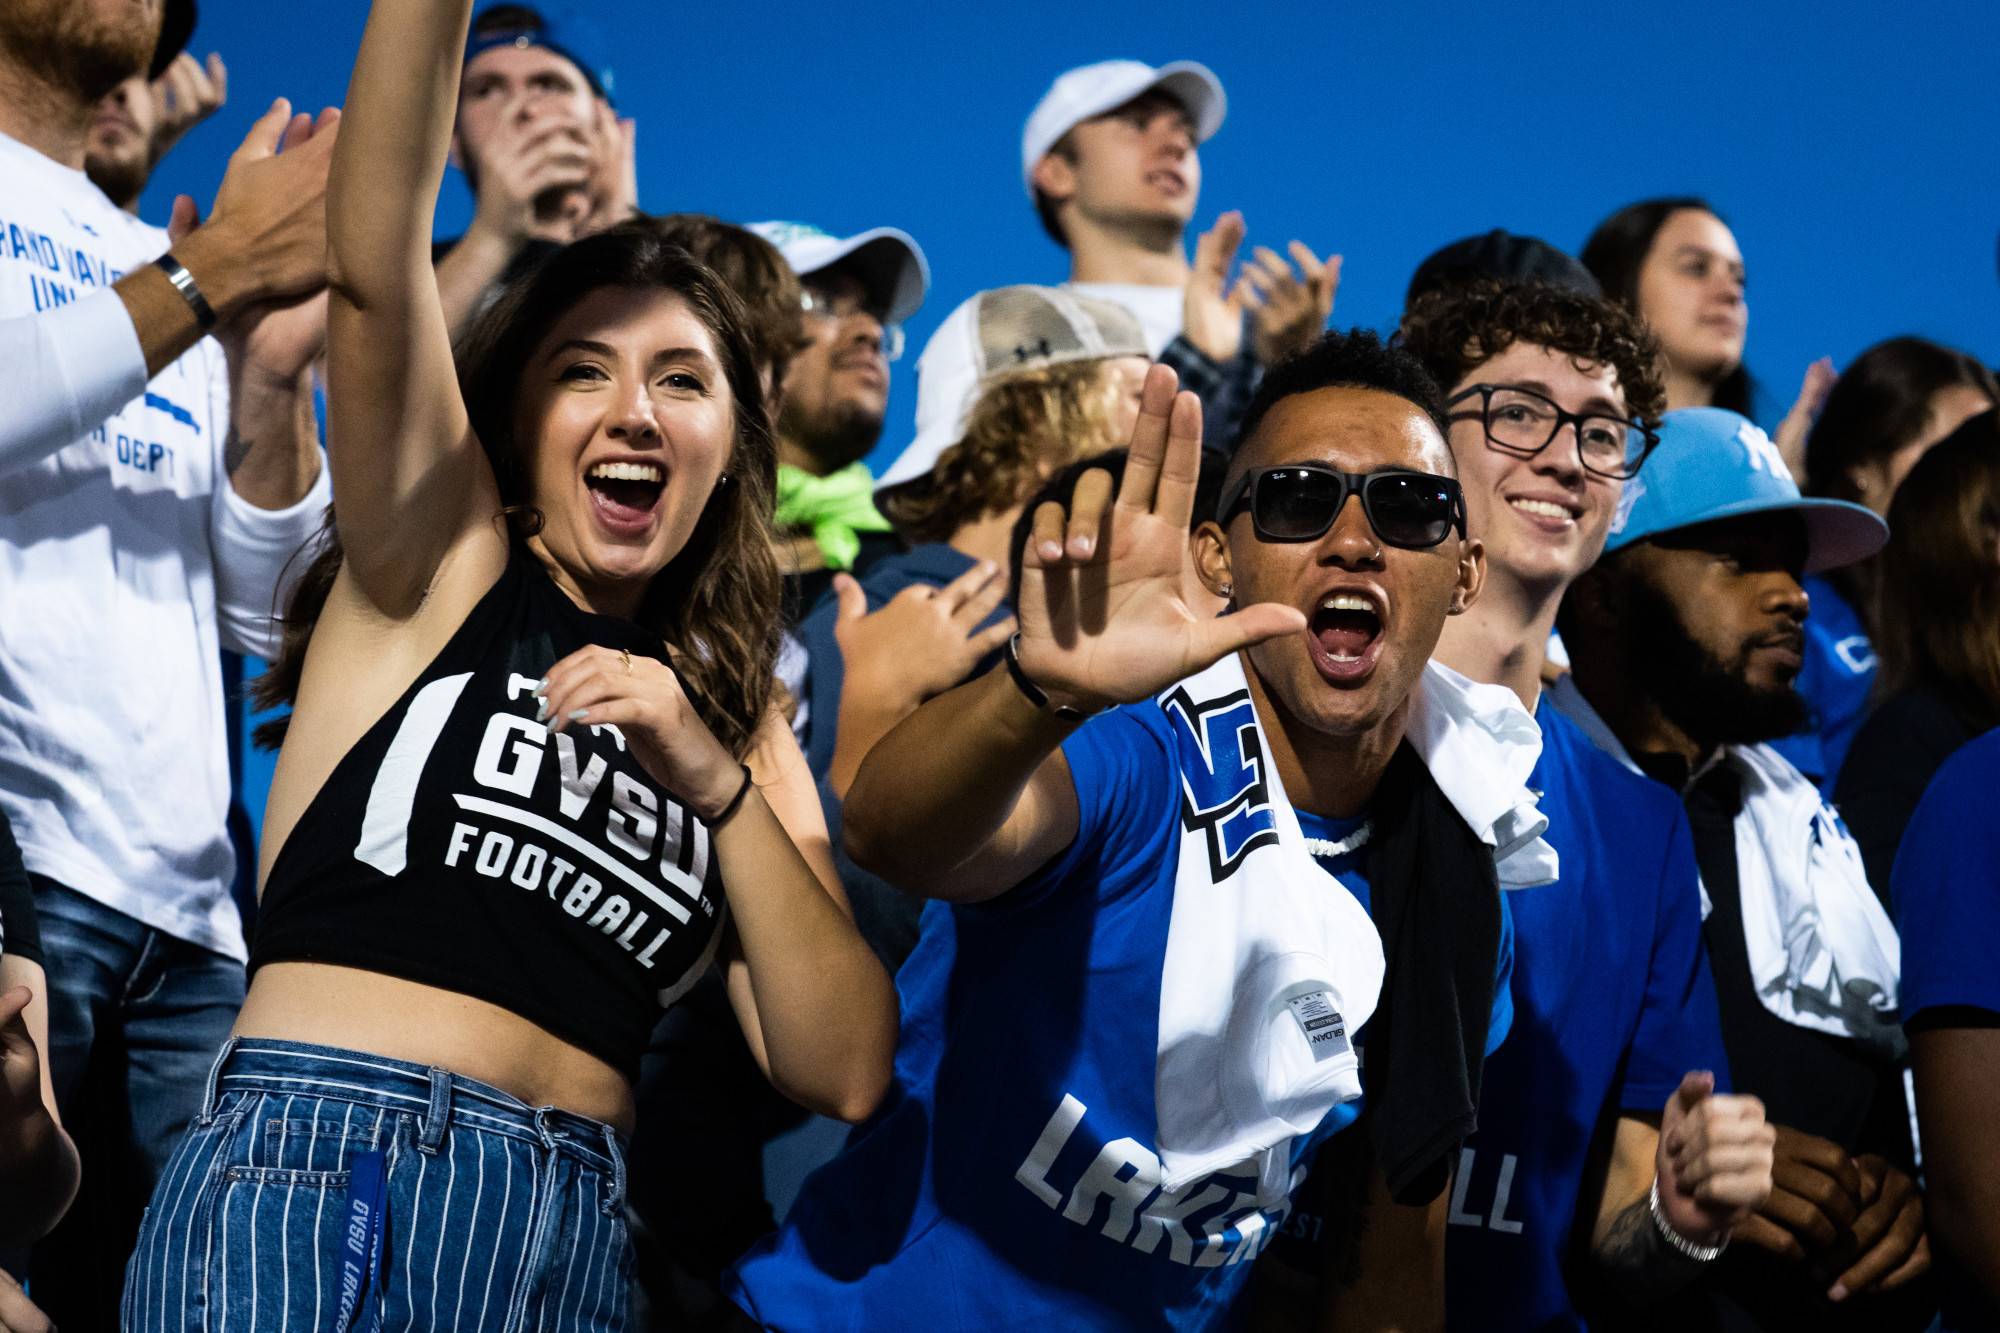 Students cheer on the GVSU football team from the stands in Lubbers Stadium